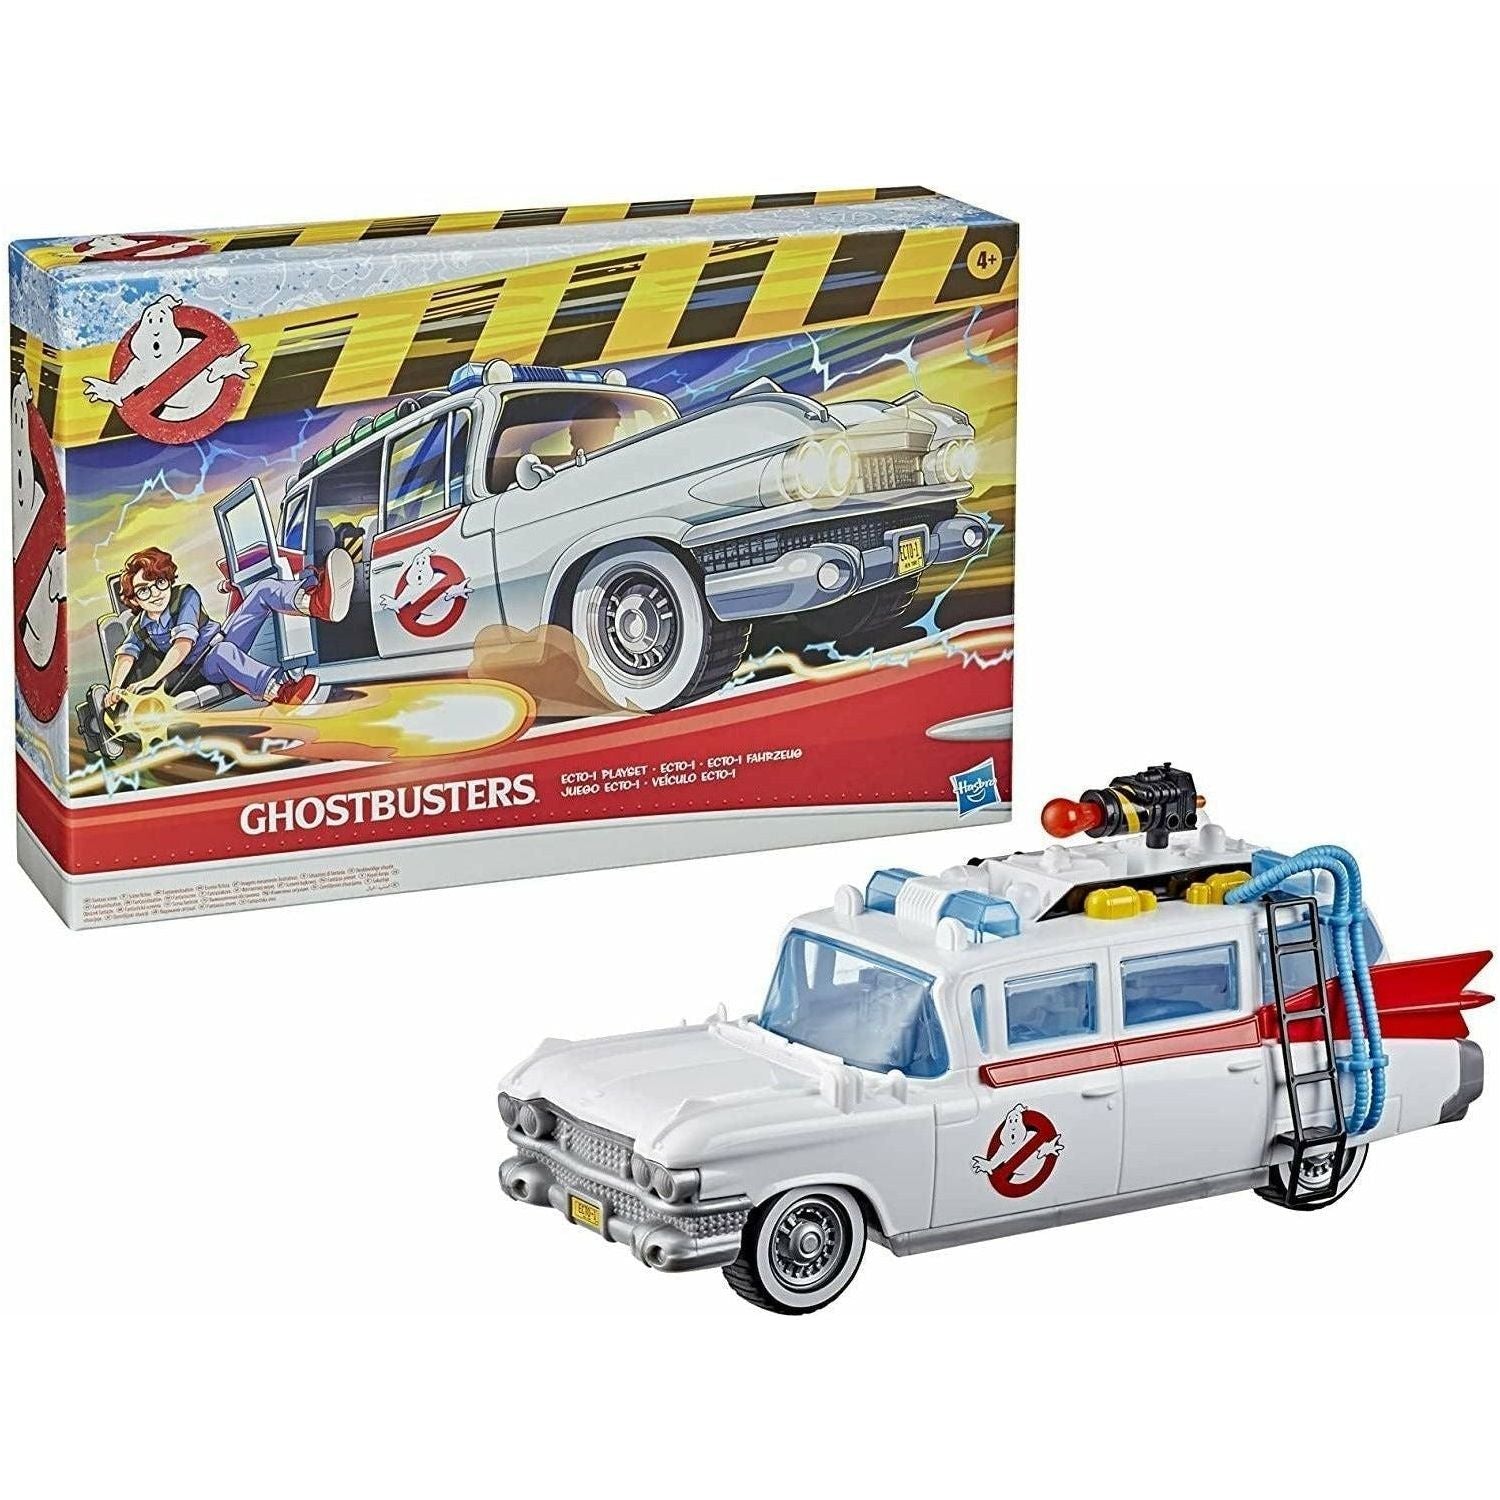 Ghostbusters 2021 Movie Ecto-1 Playset with Accessories New Car Great Gift for Kids, Collectors & Fans - BumbleToys - 5-7 Years, Amazon, Boys, Cars, Ghostbusters, OXE, Pre-Order